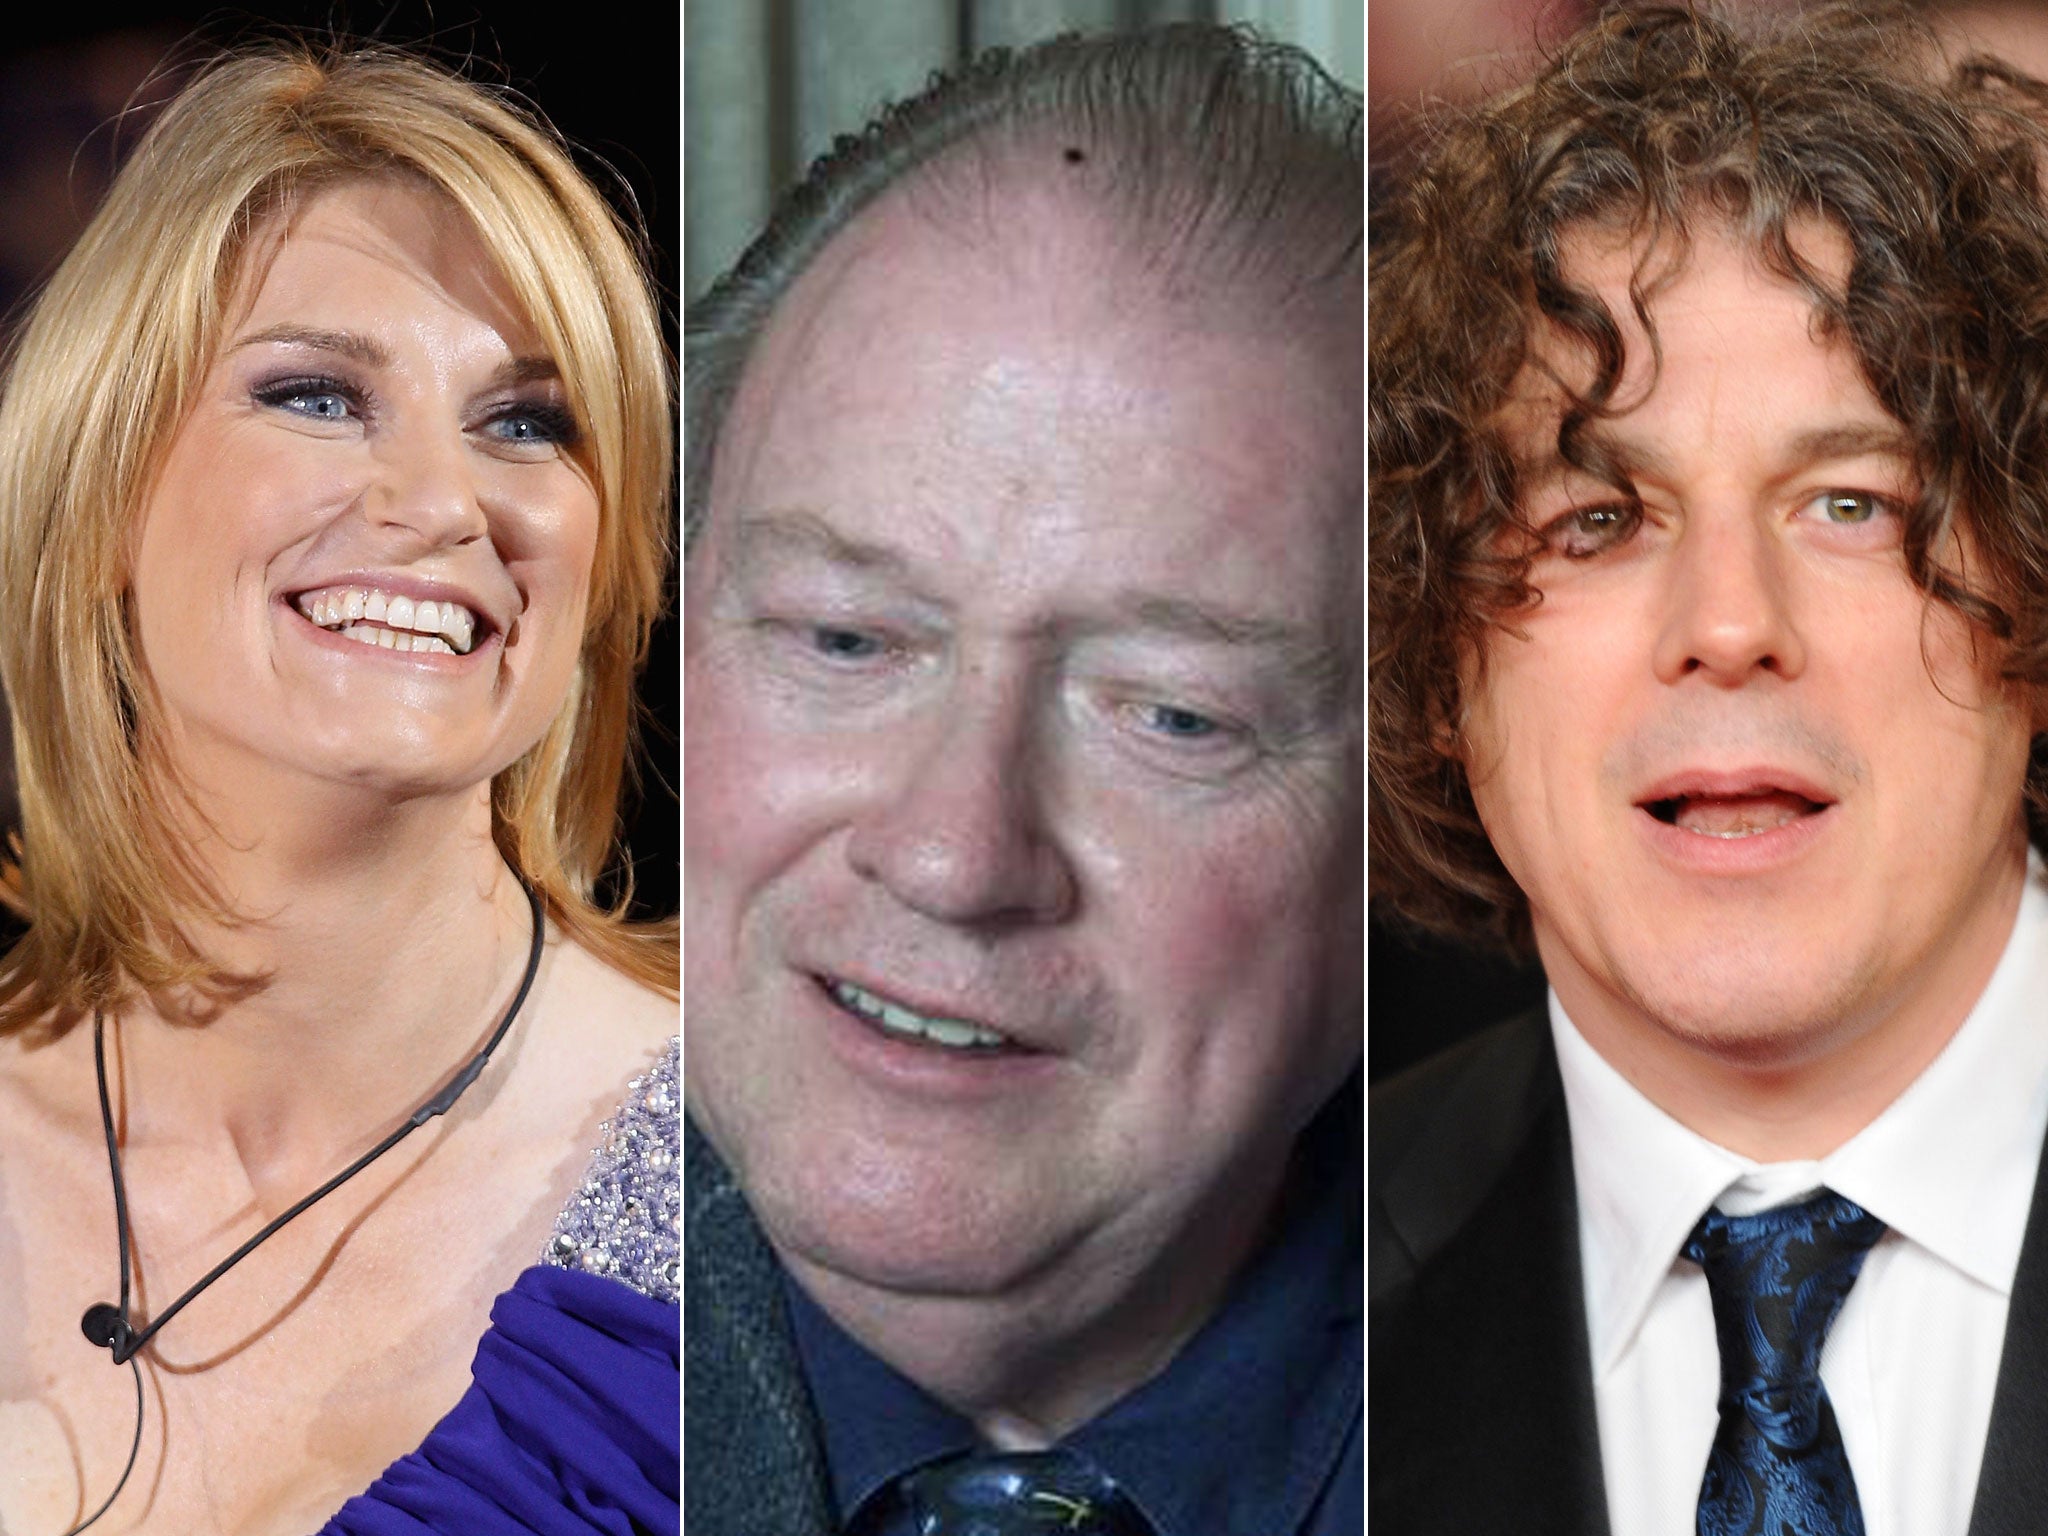 From left: Speaker's wife Sally Bercow, Lord McAlpine, and comedian Alan Davies